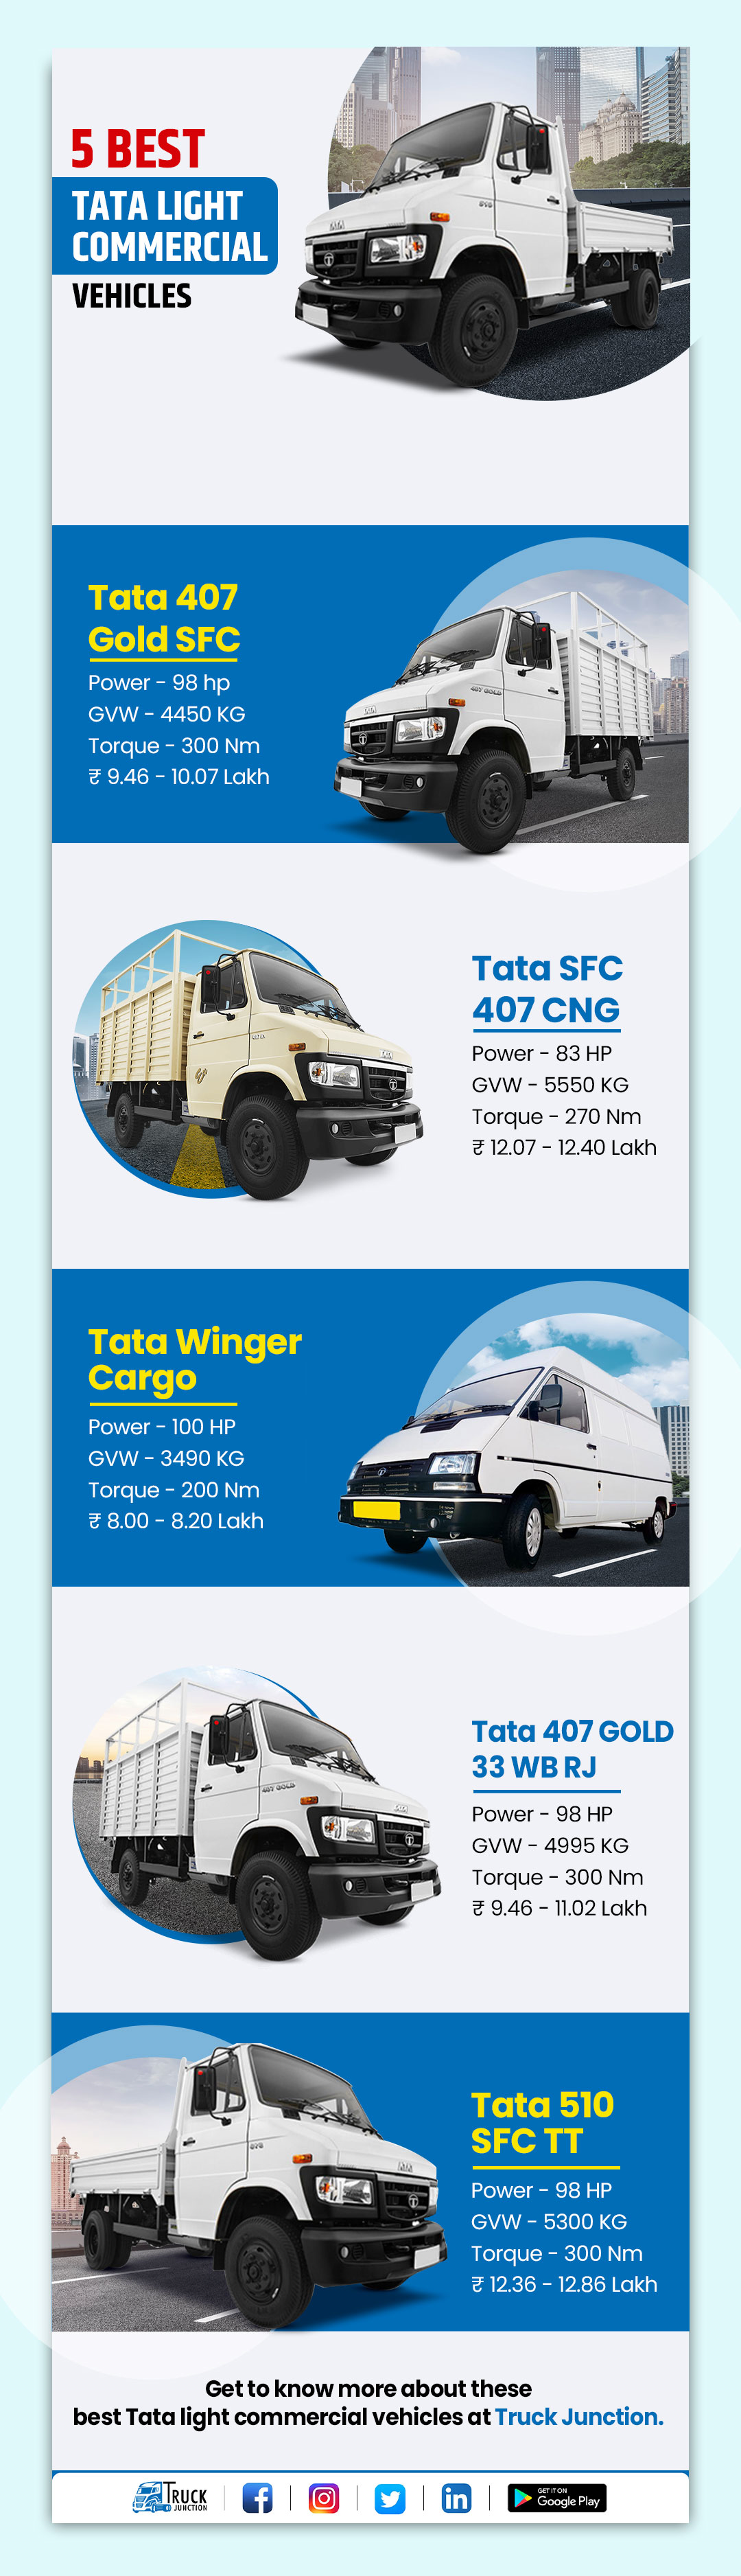 Top 5 Tata Light Commercial Vehicles infographic